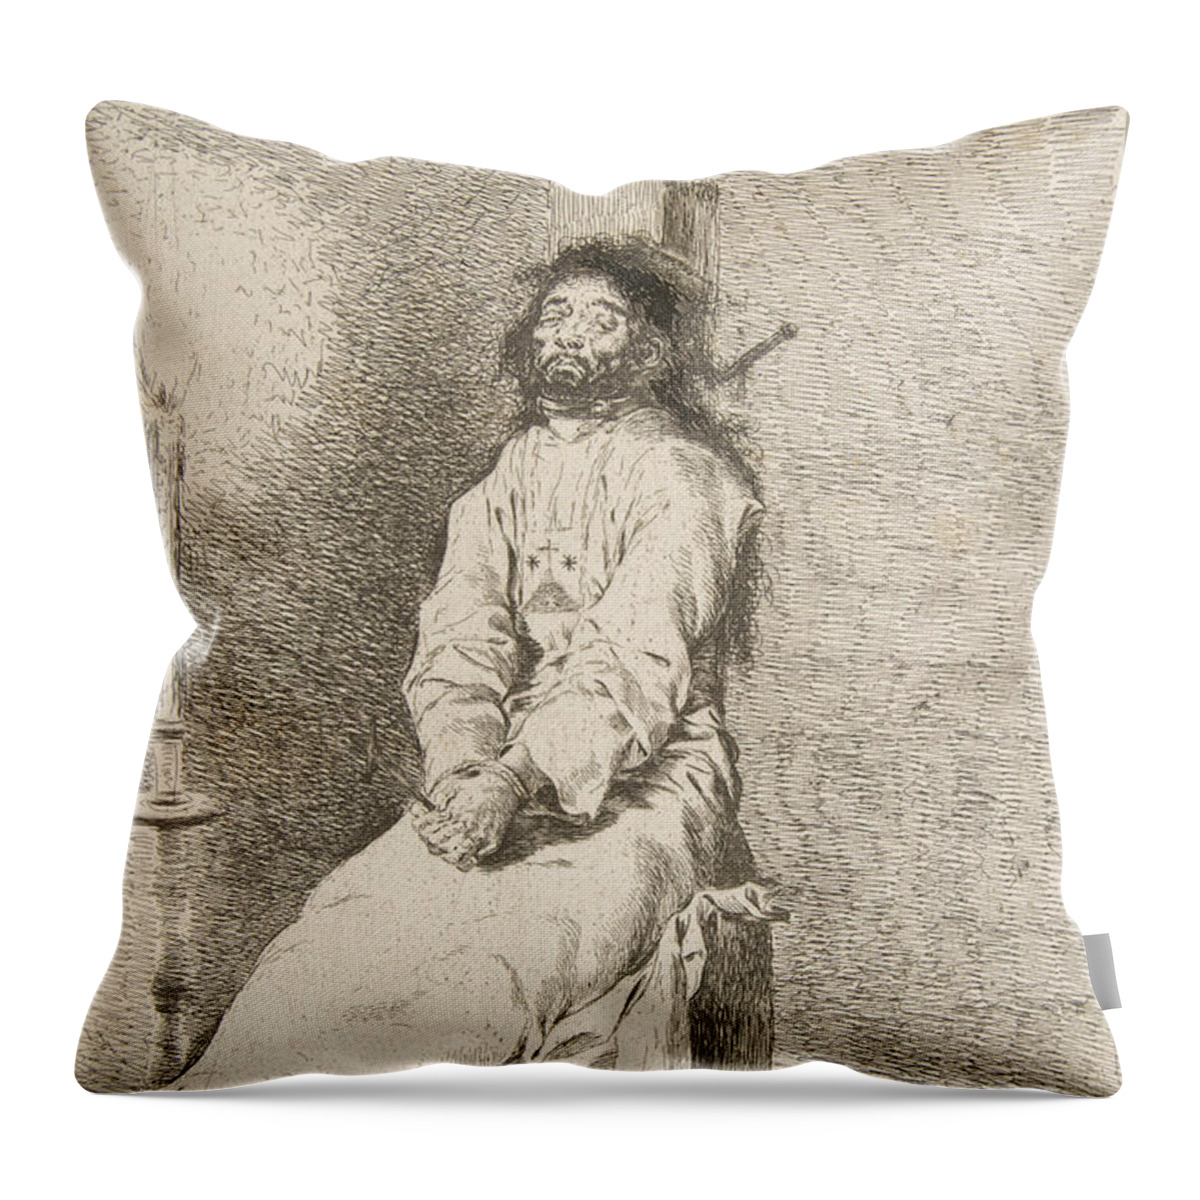 Spanish Art Throw Pillow featuring the relief The garroted man by Francisco Goya